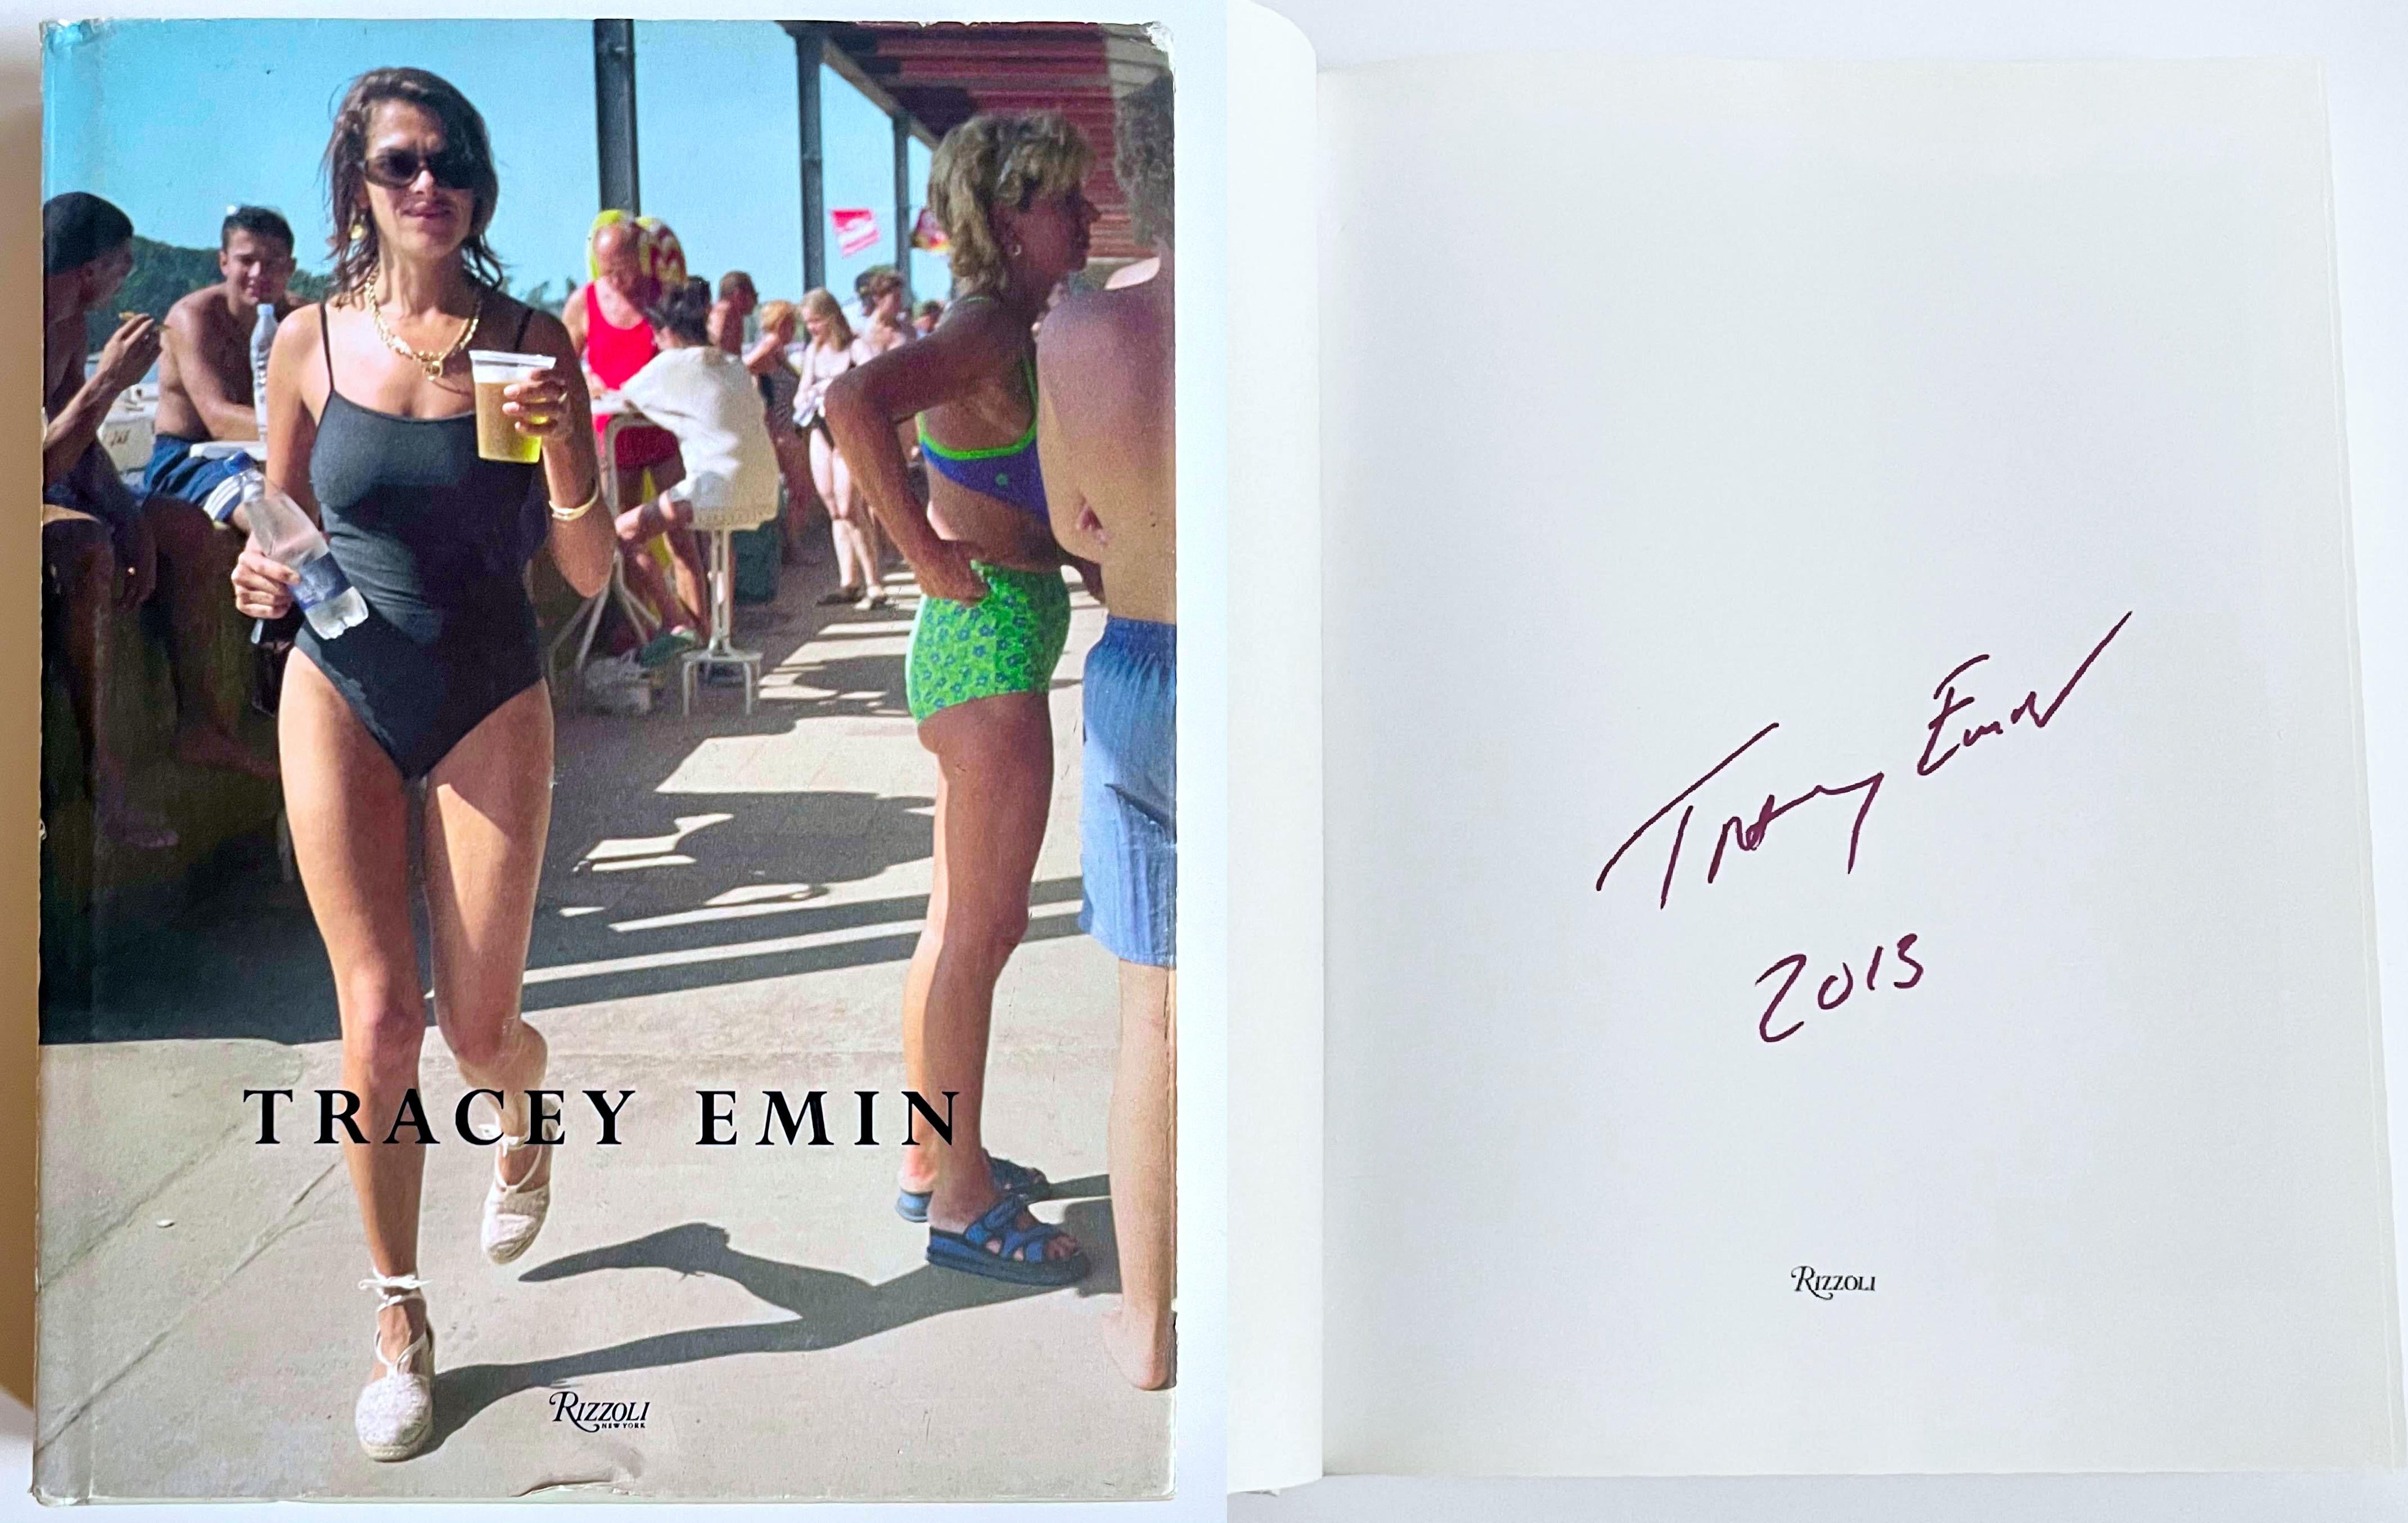 Tracey Emin
Tracey Emin: Works 1963-2006 (hand signed and dated by Tracey Emin), 2006
Hardback monograph with dust jacket (hand signed and dated in 2013 by Tracey Emin)
Boldly signed and dated 2013 by Tracey Emin on the first front end page
12 3/4 ×